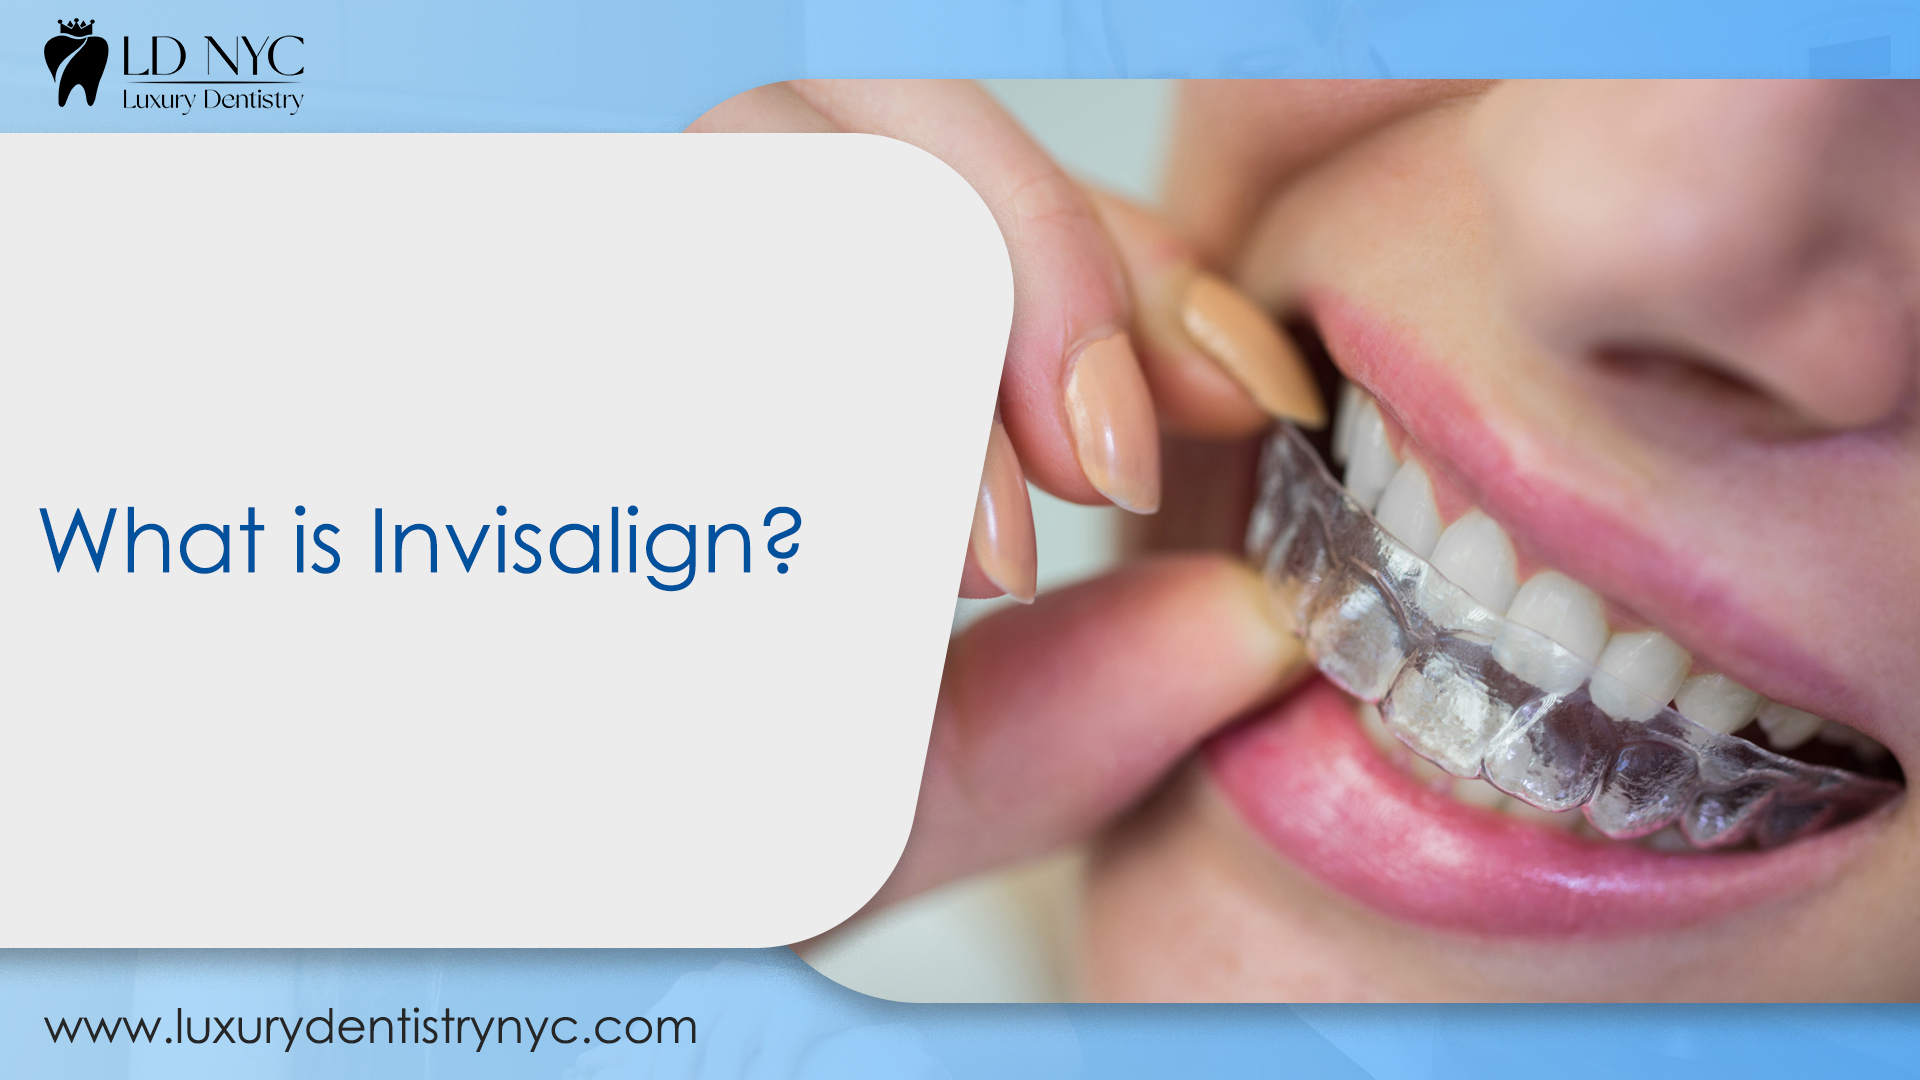 Learn about Invisalign!